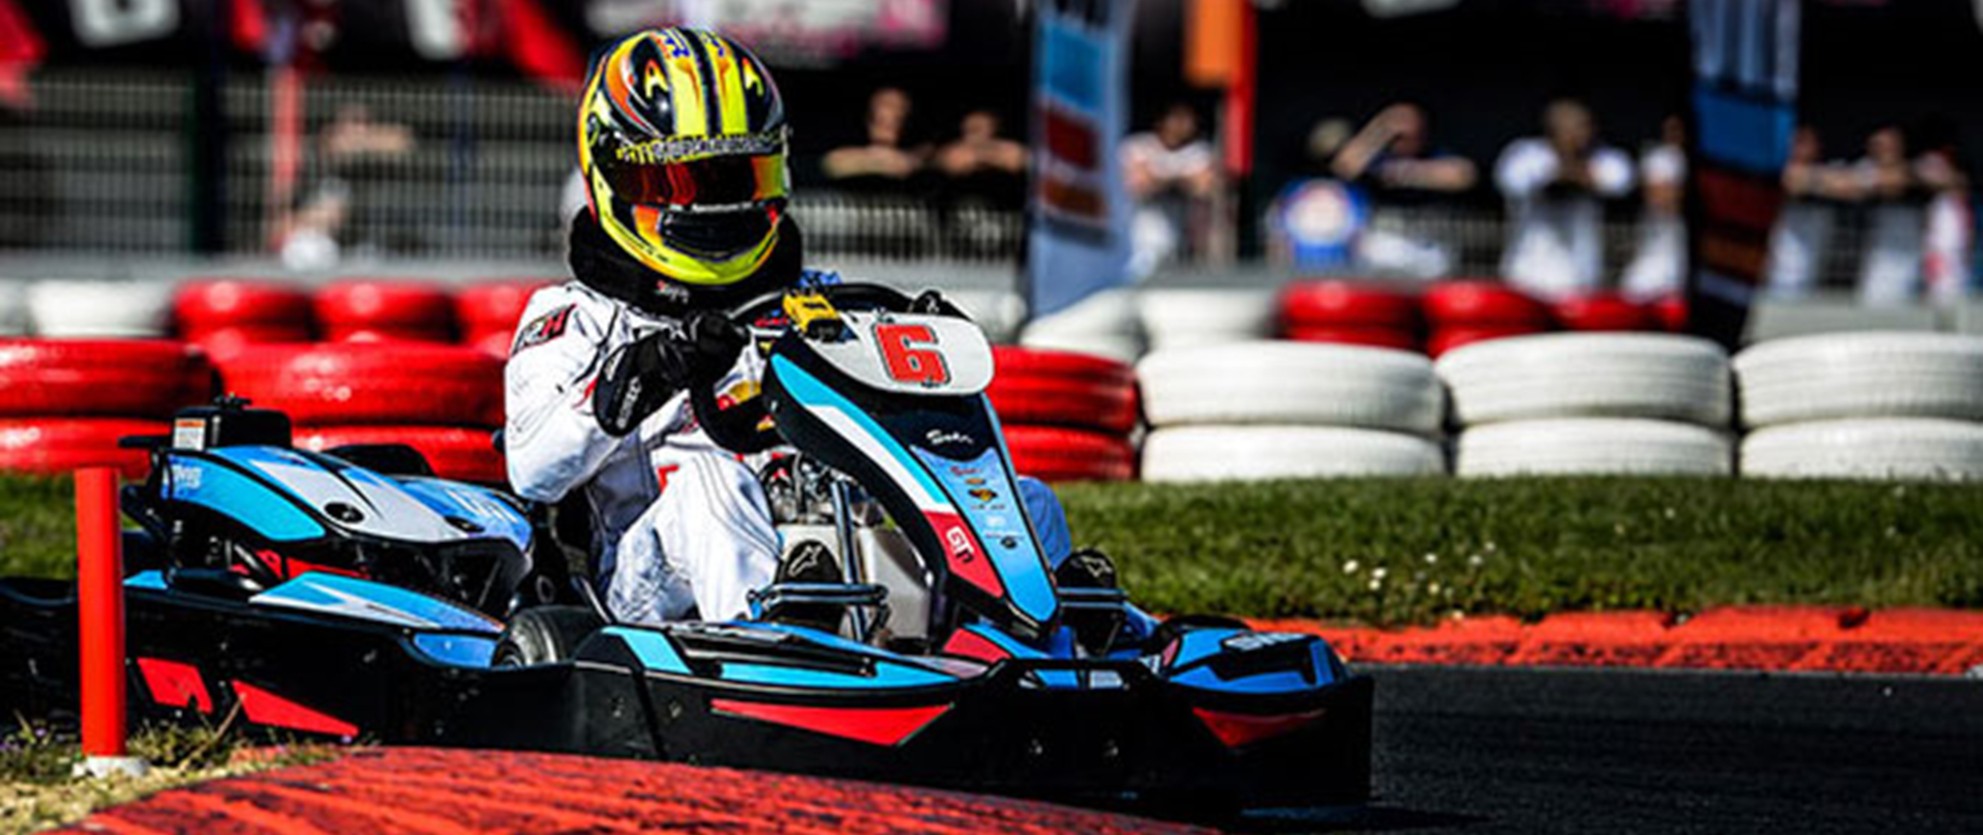 KARTING CLOTHING AND ACCESSORIES